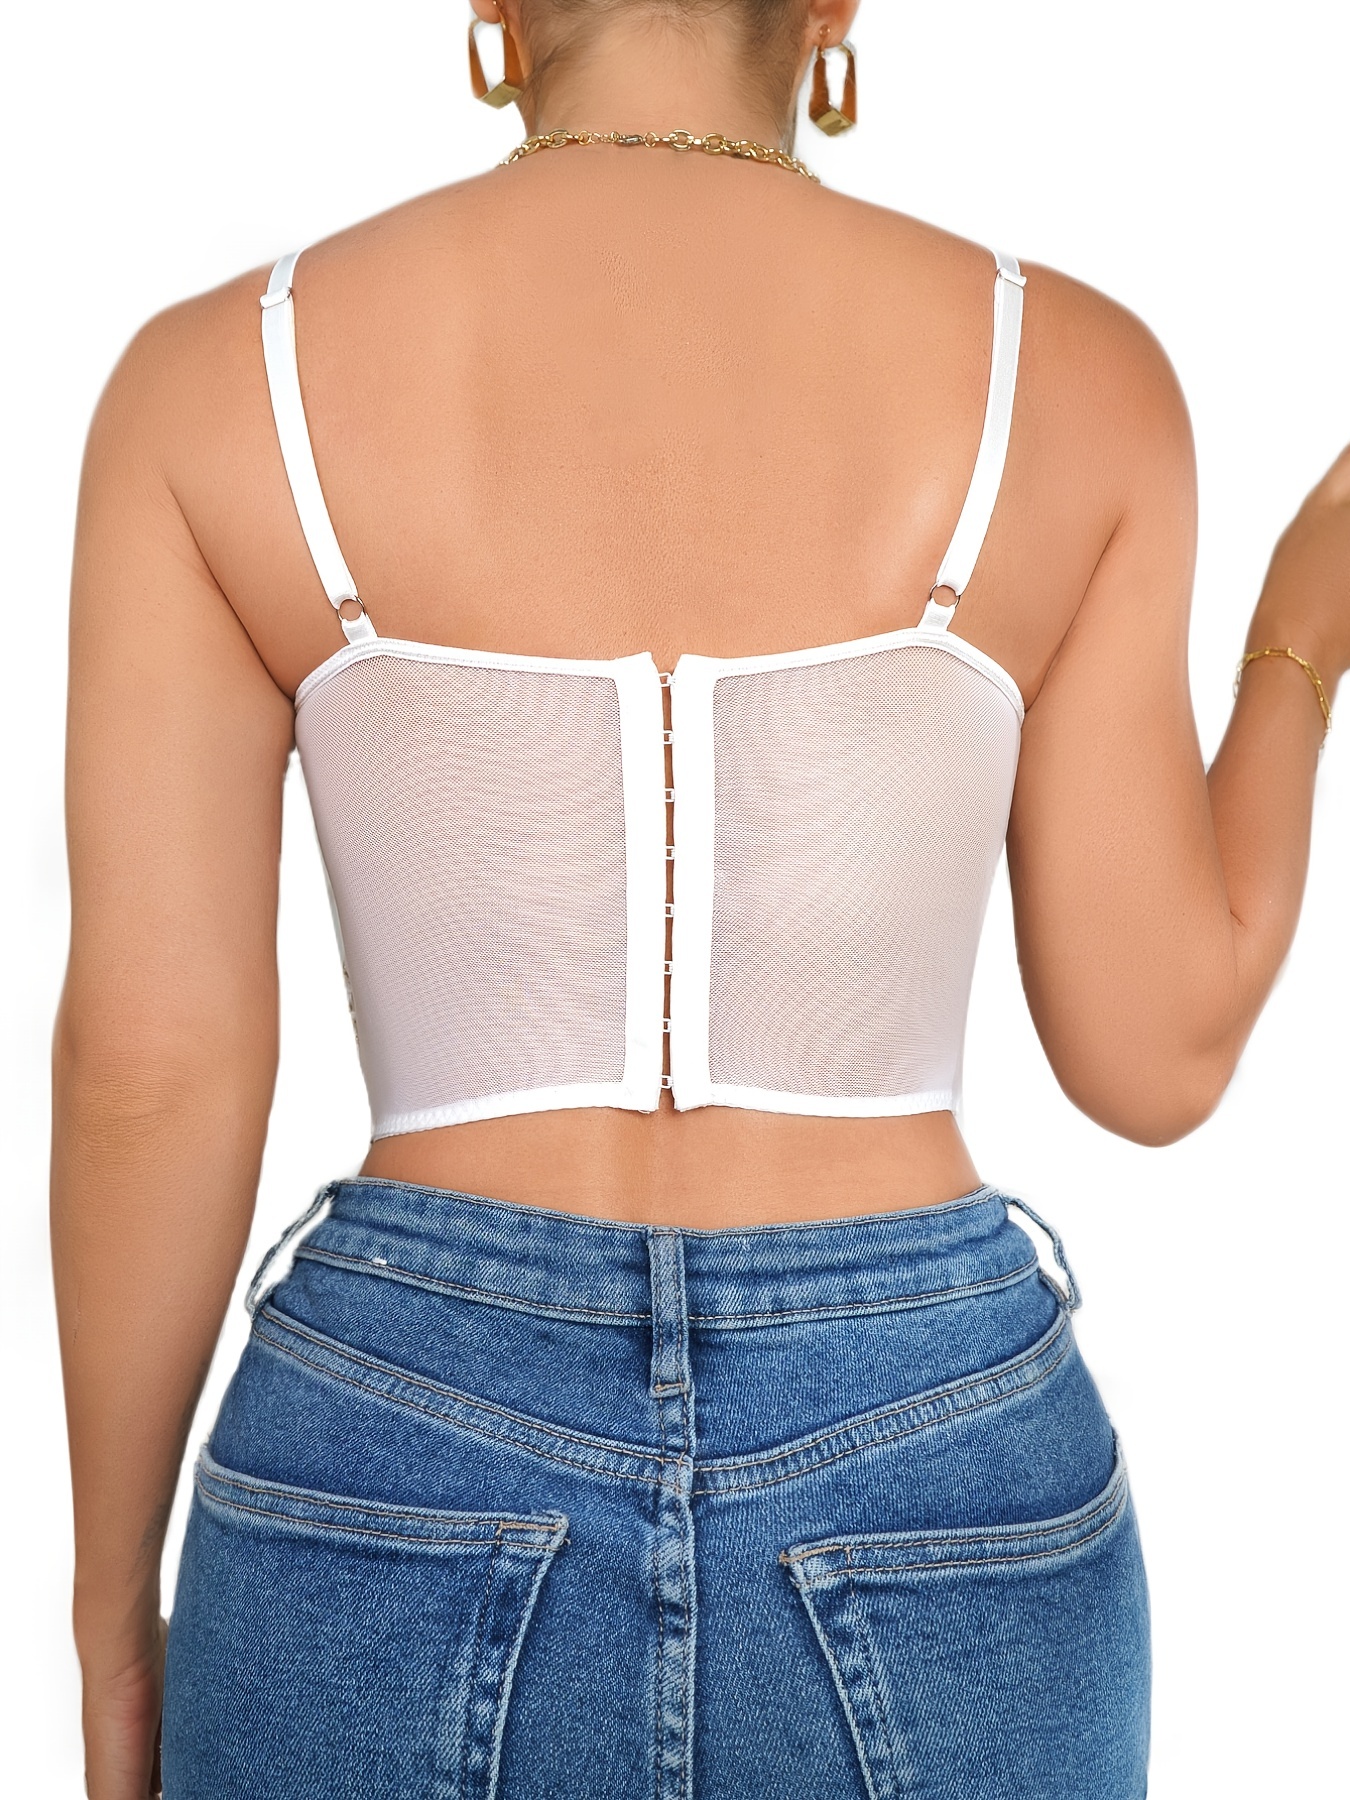 Aligament Camisoles & Tanks For Women Floral Lace Bustier Corset Party  Bralet Crop Top Size S 